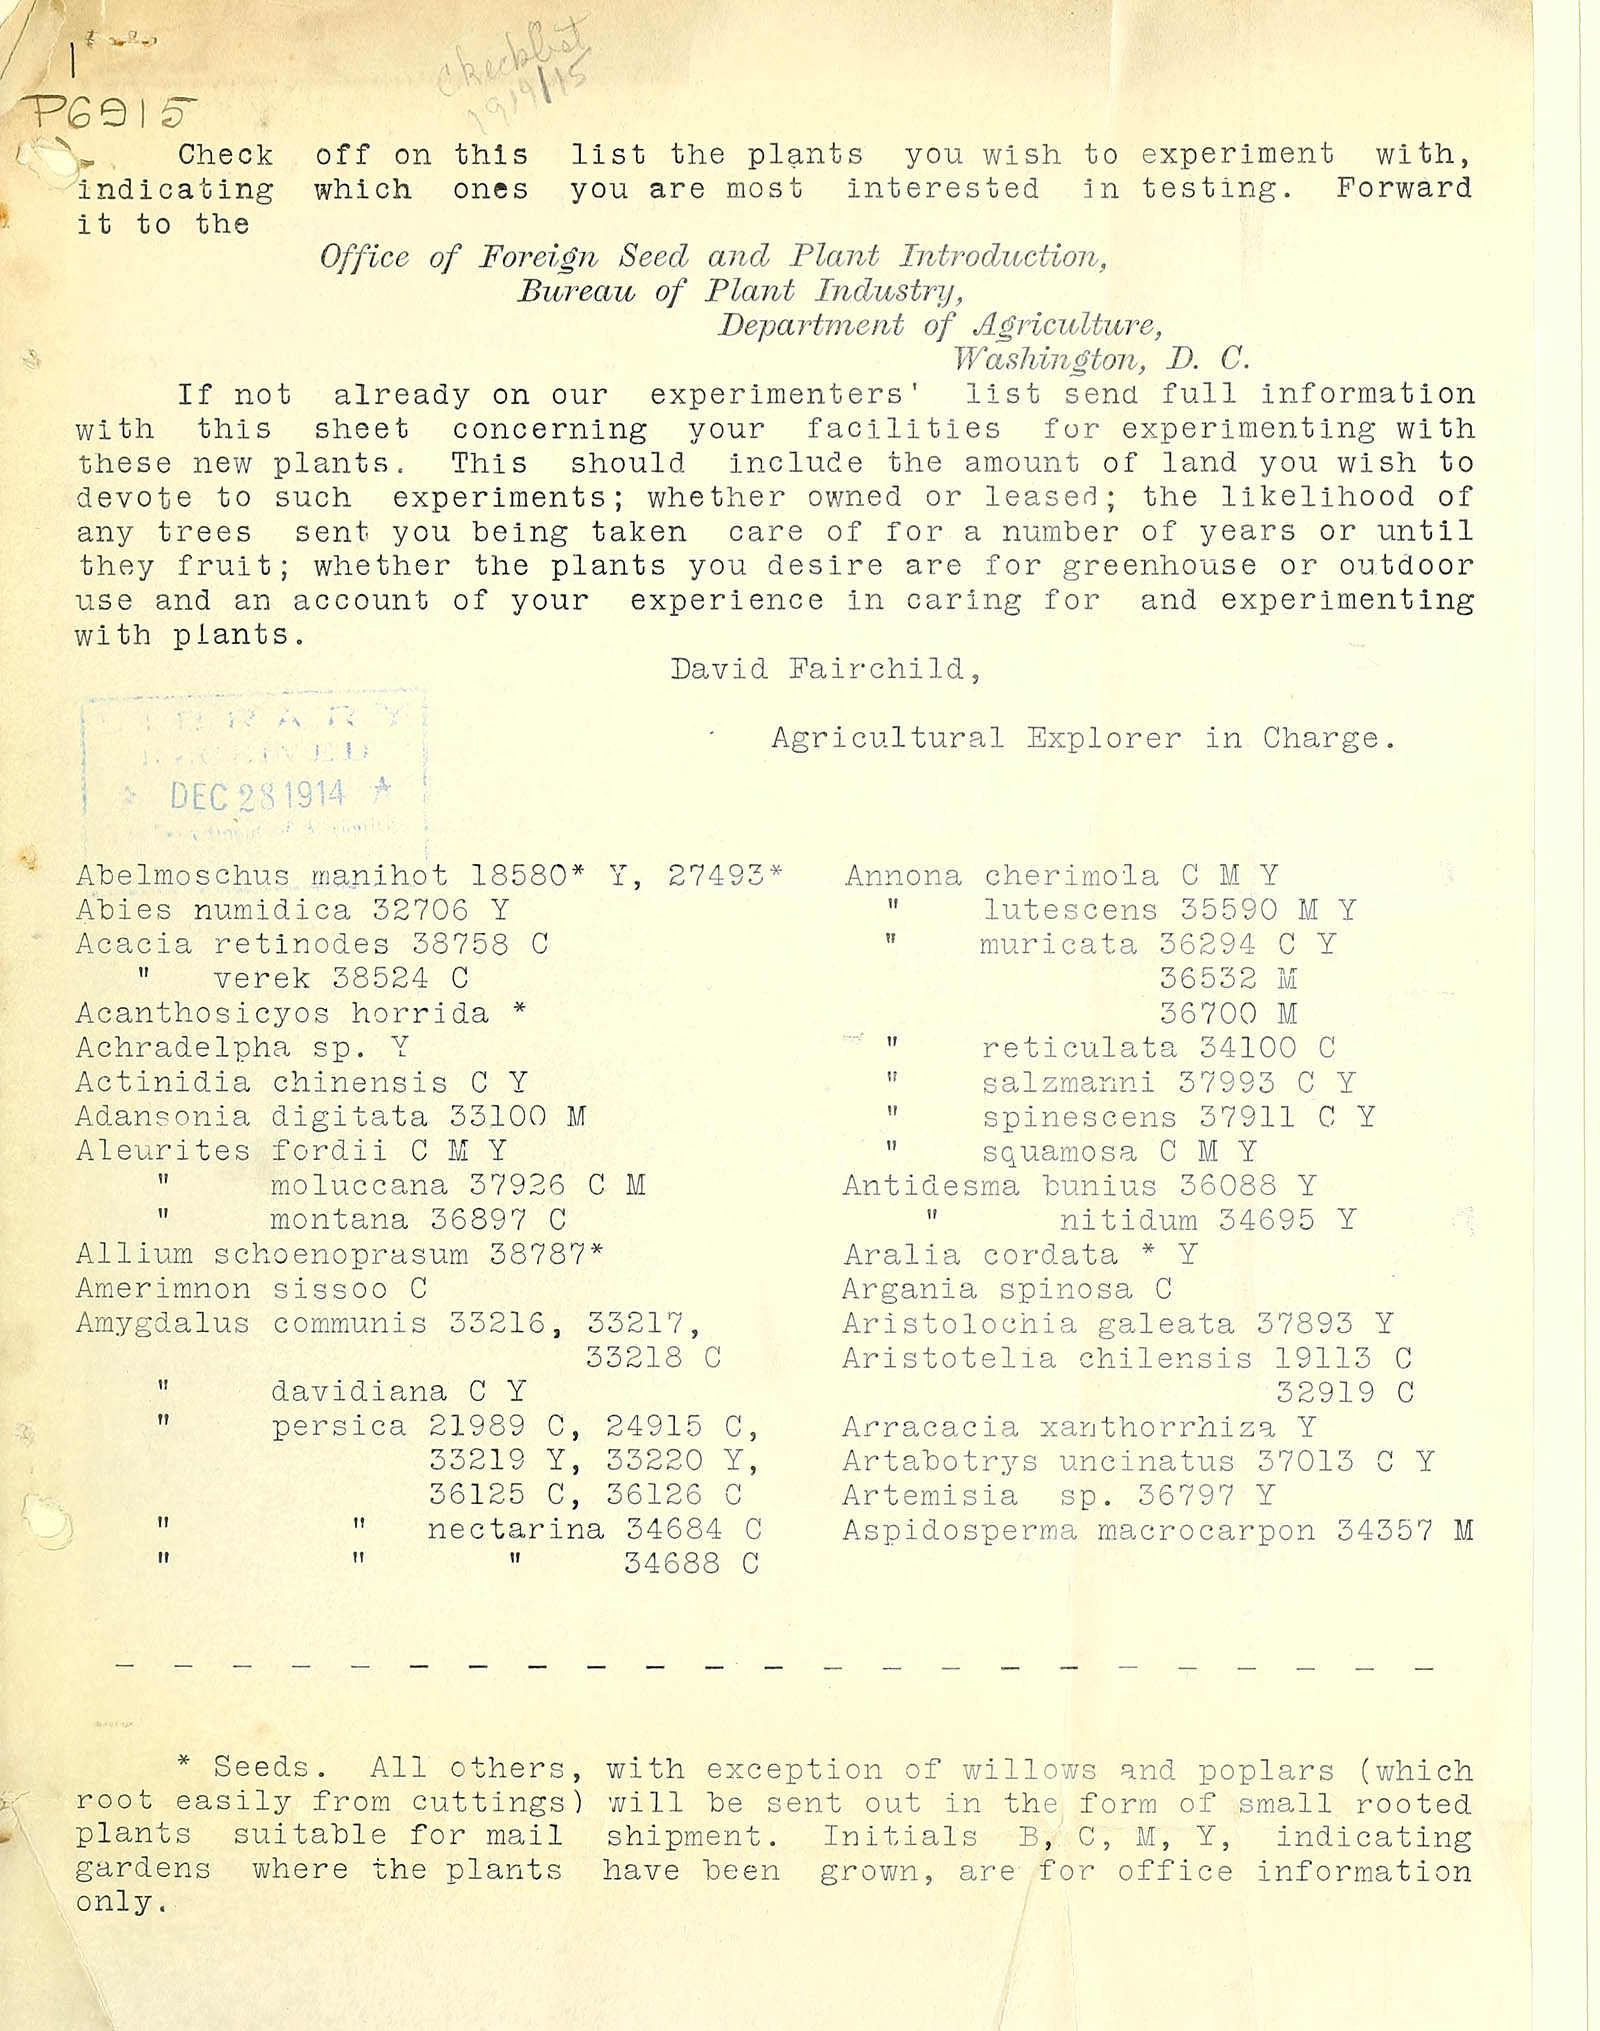 Page from “Check list of new plant introductions ready to be tested by cooperators,” 1914